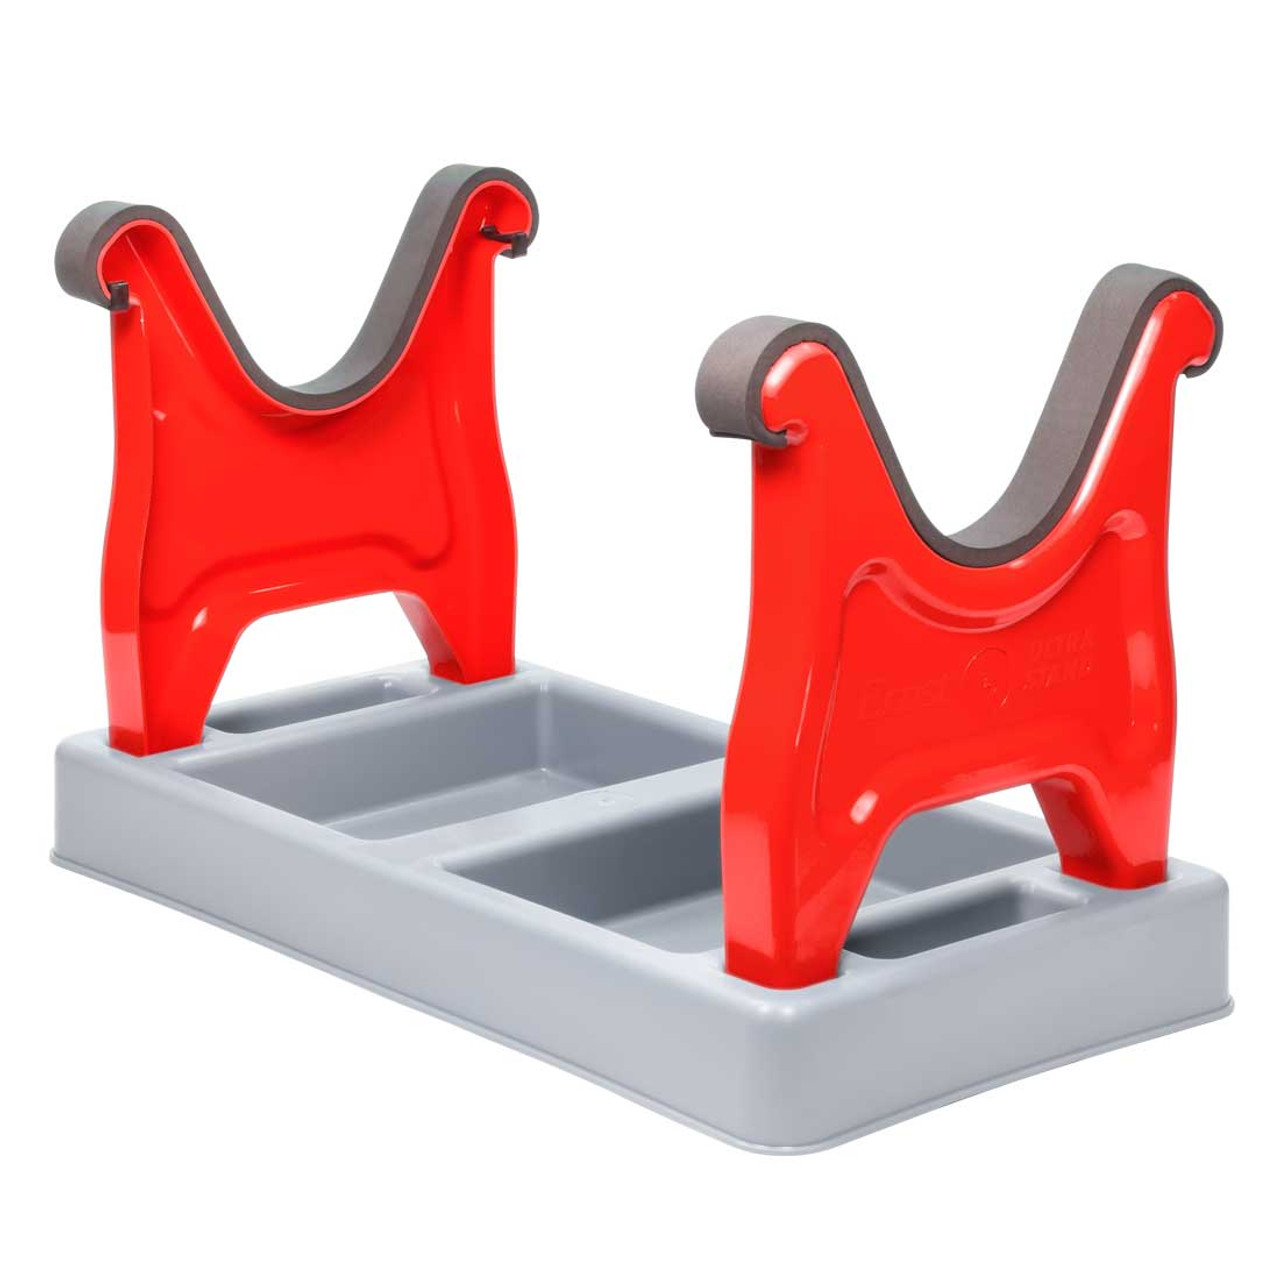 Ernst Manufacturing Ultra Stand Airplane Stand (Red/Grey)